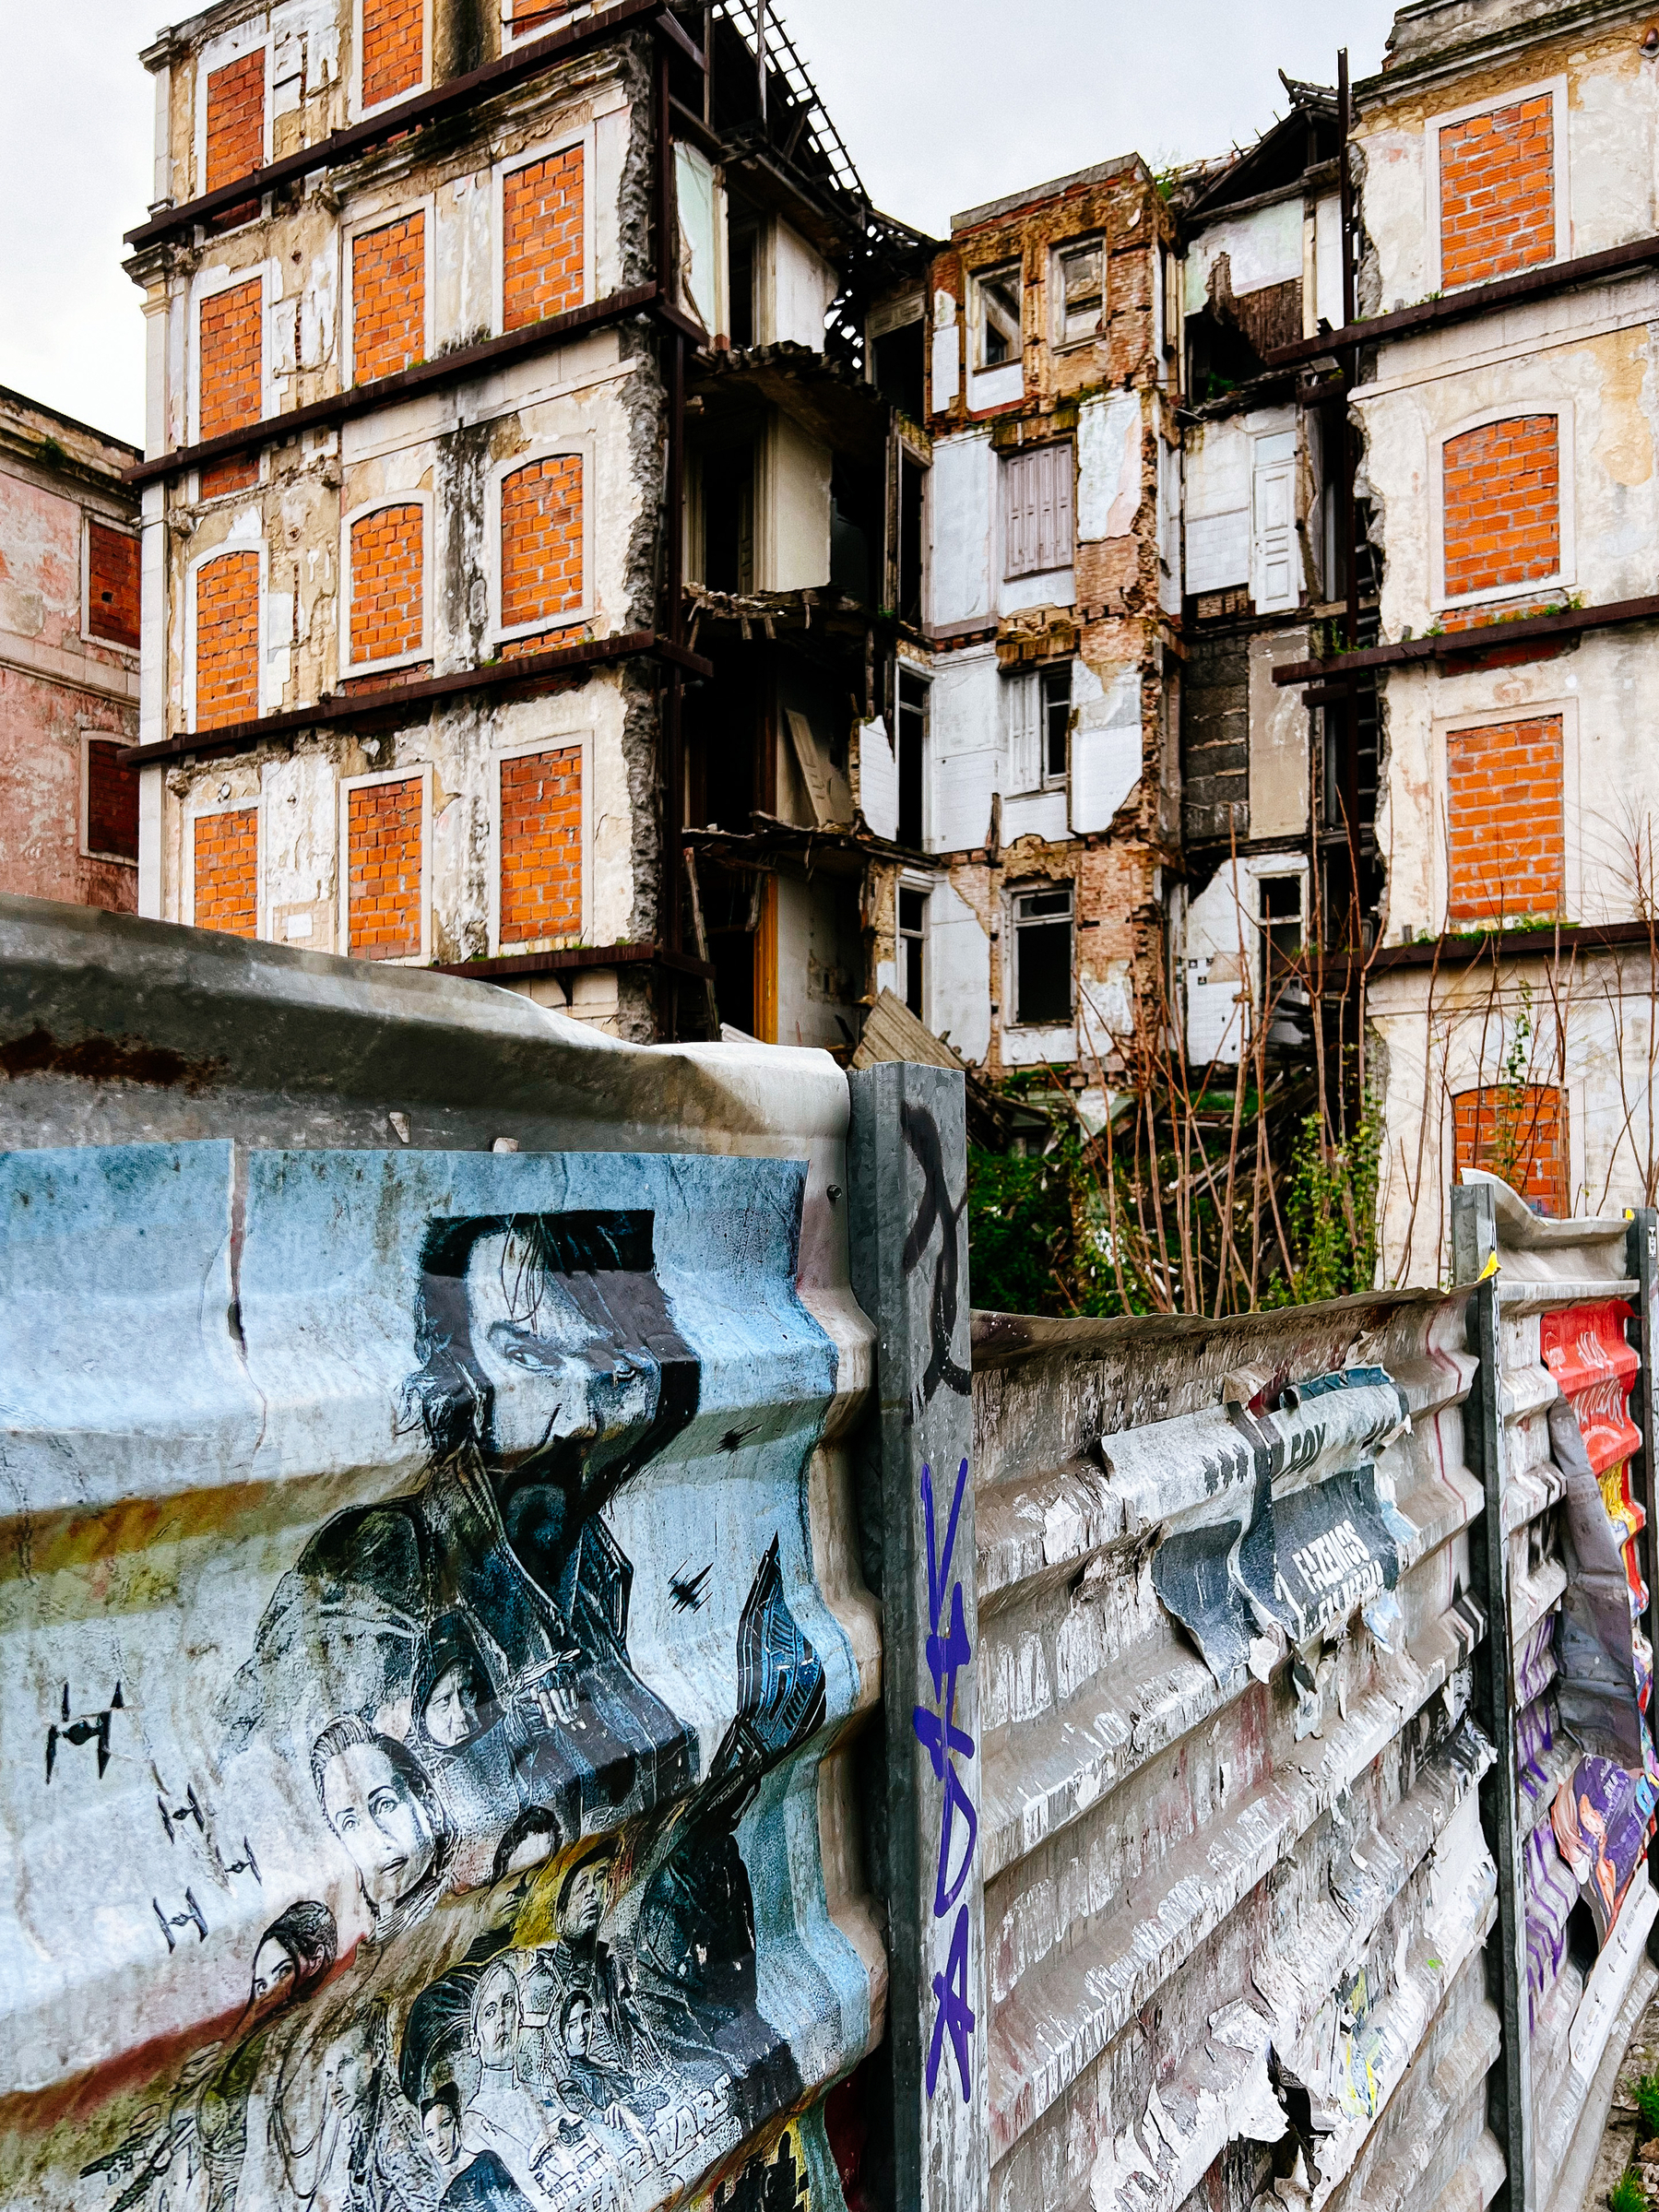 The back of a derelict building, crumbling. 